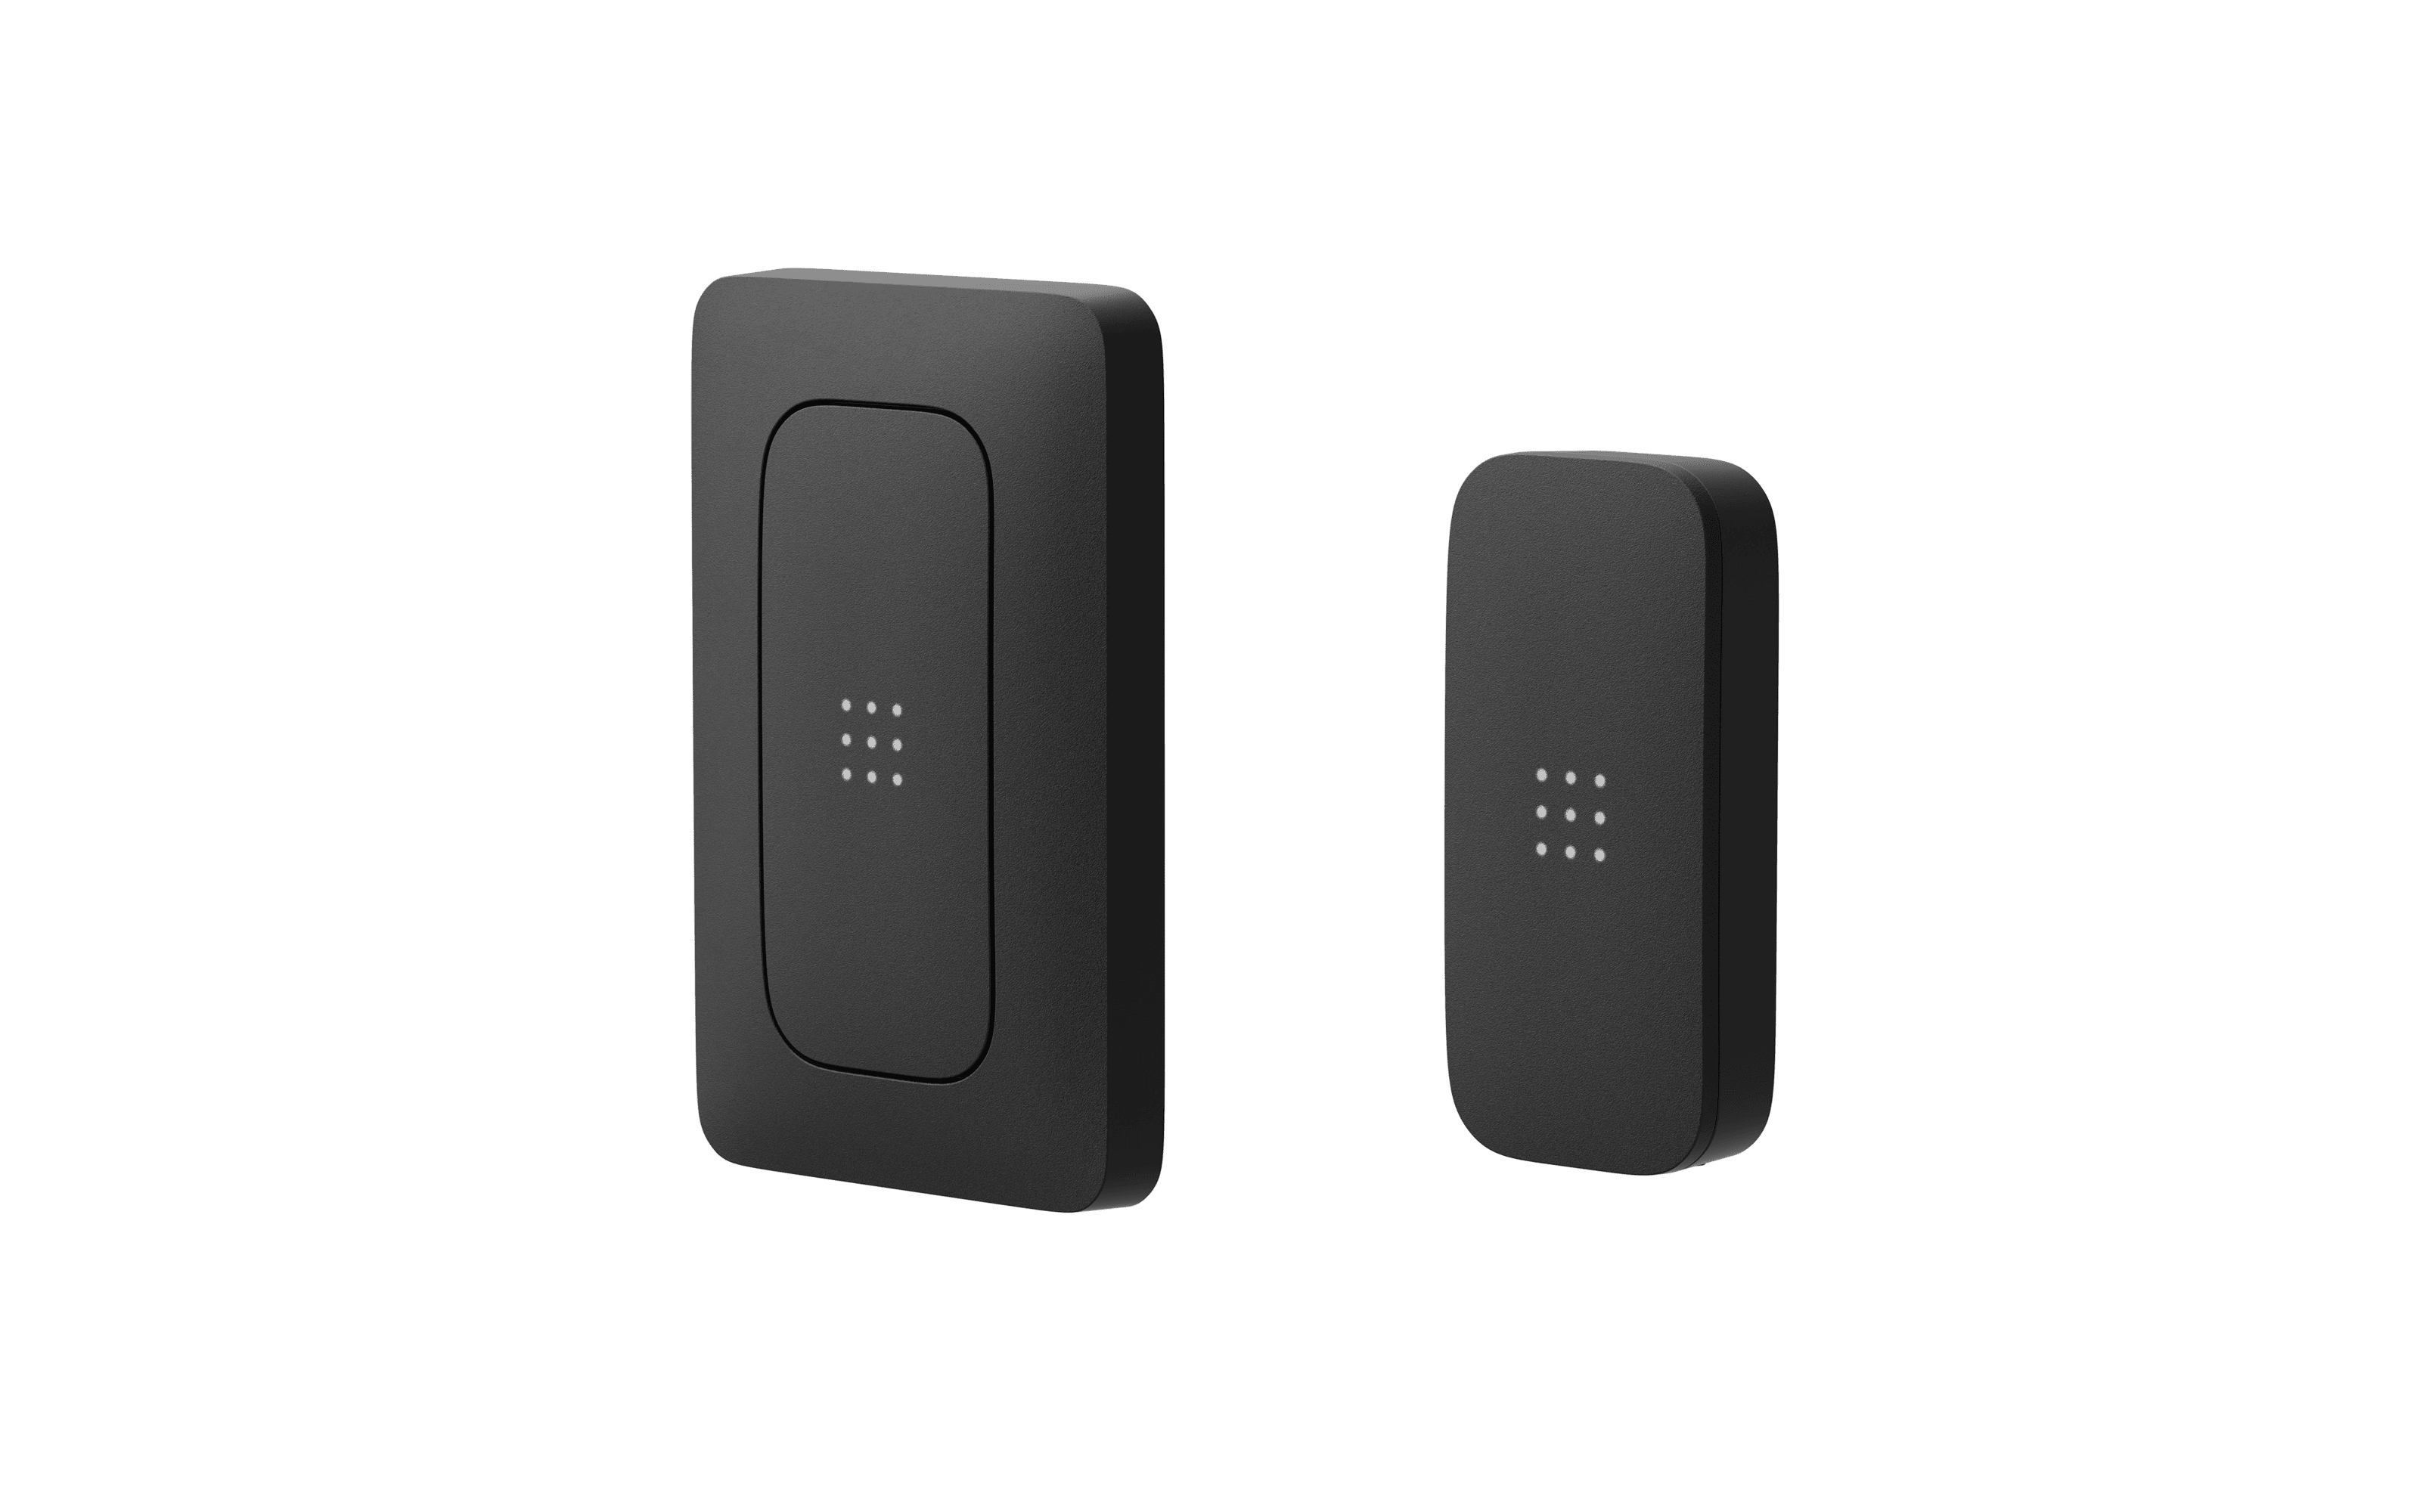 Two versions of access control security door card reader 